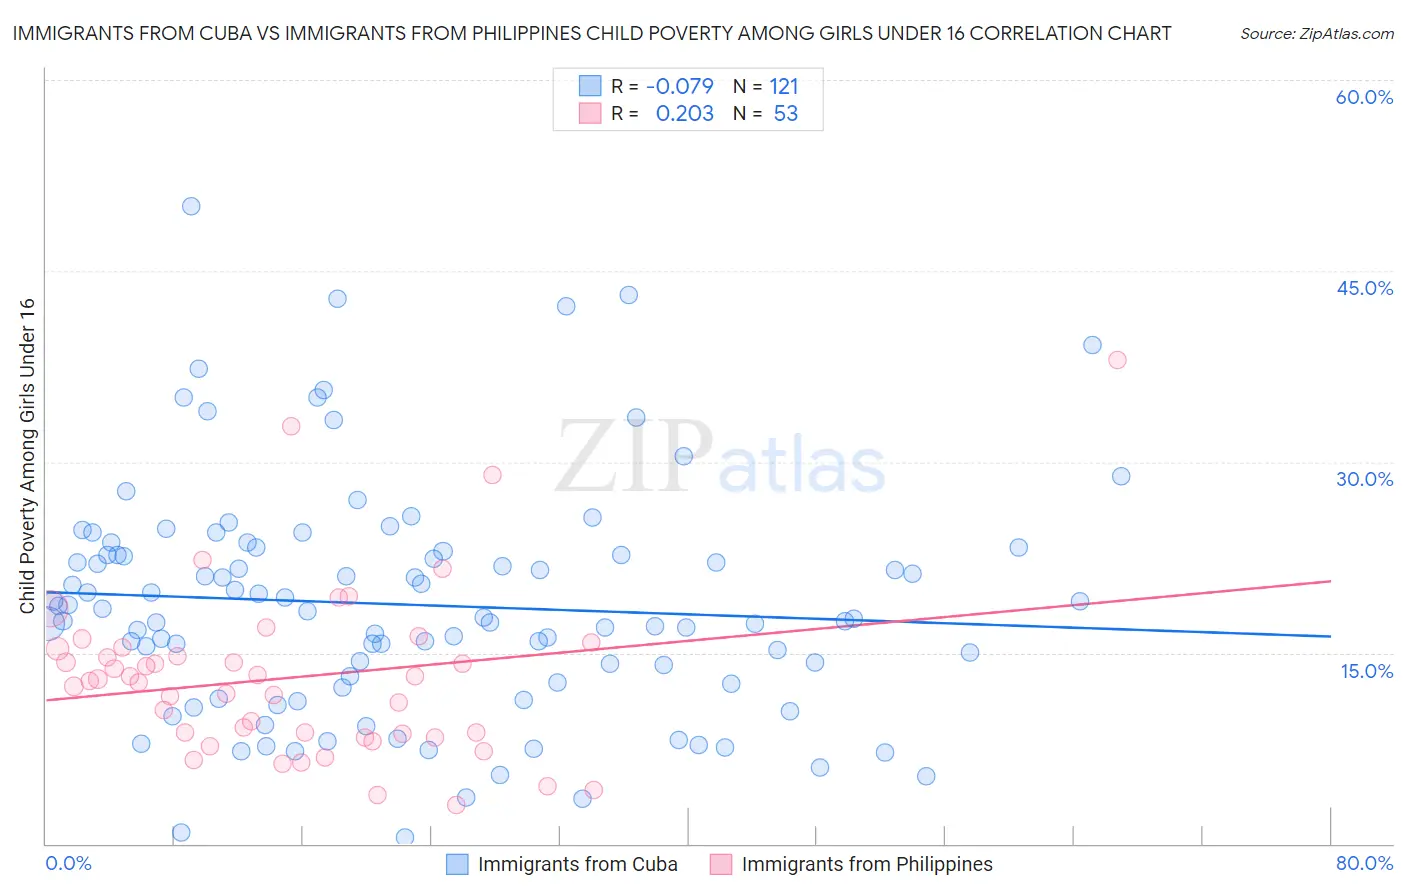 Immigrants from Cuba vs Immigrants from Philippines Child Poverty Among Girls Under 16